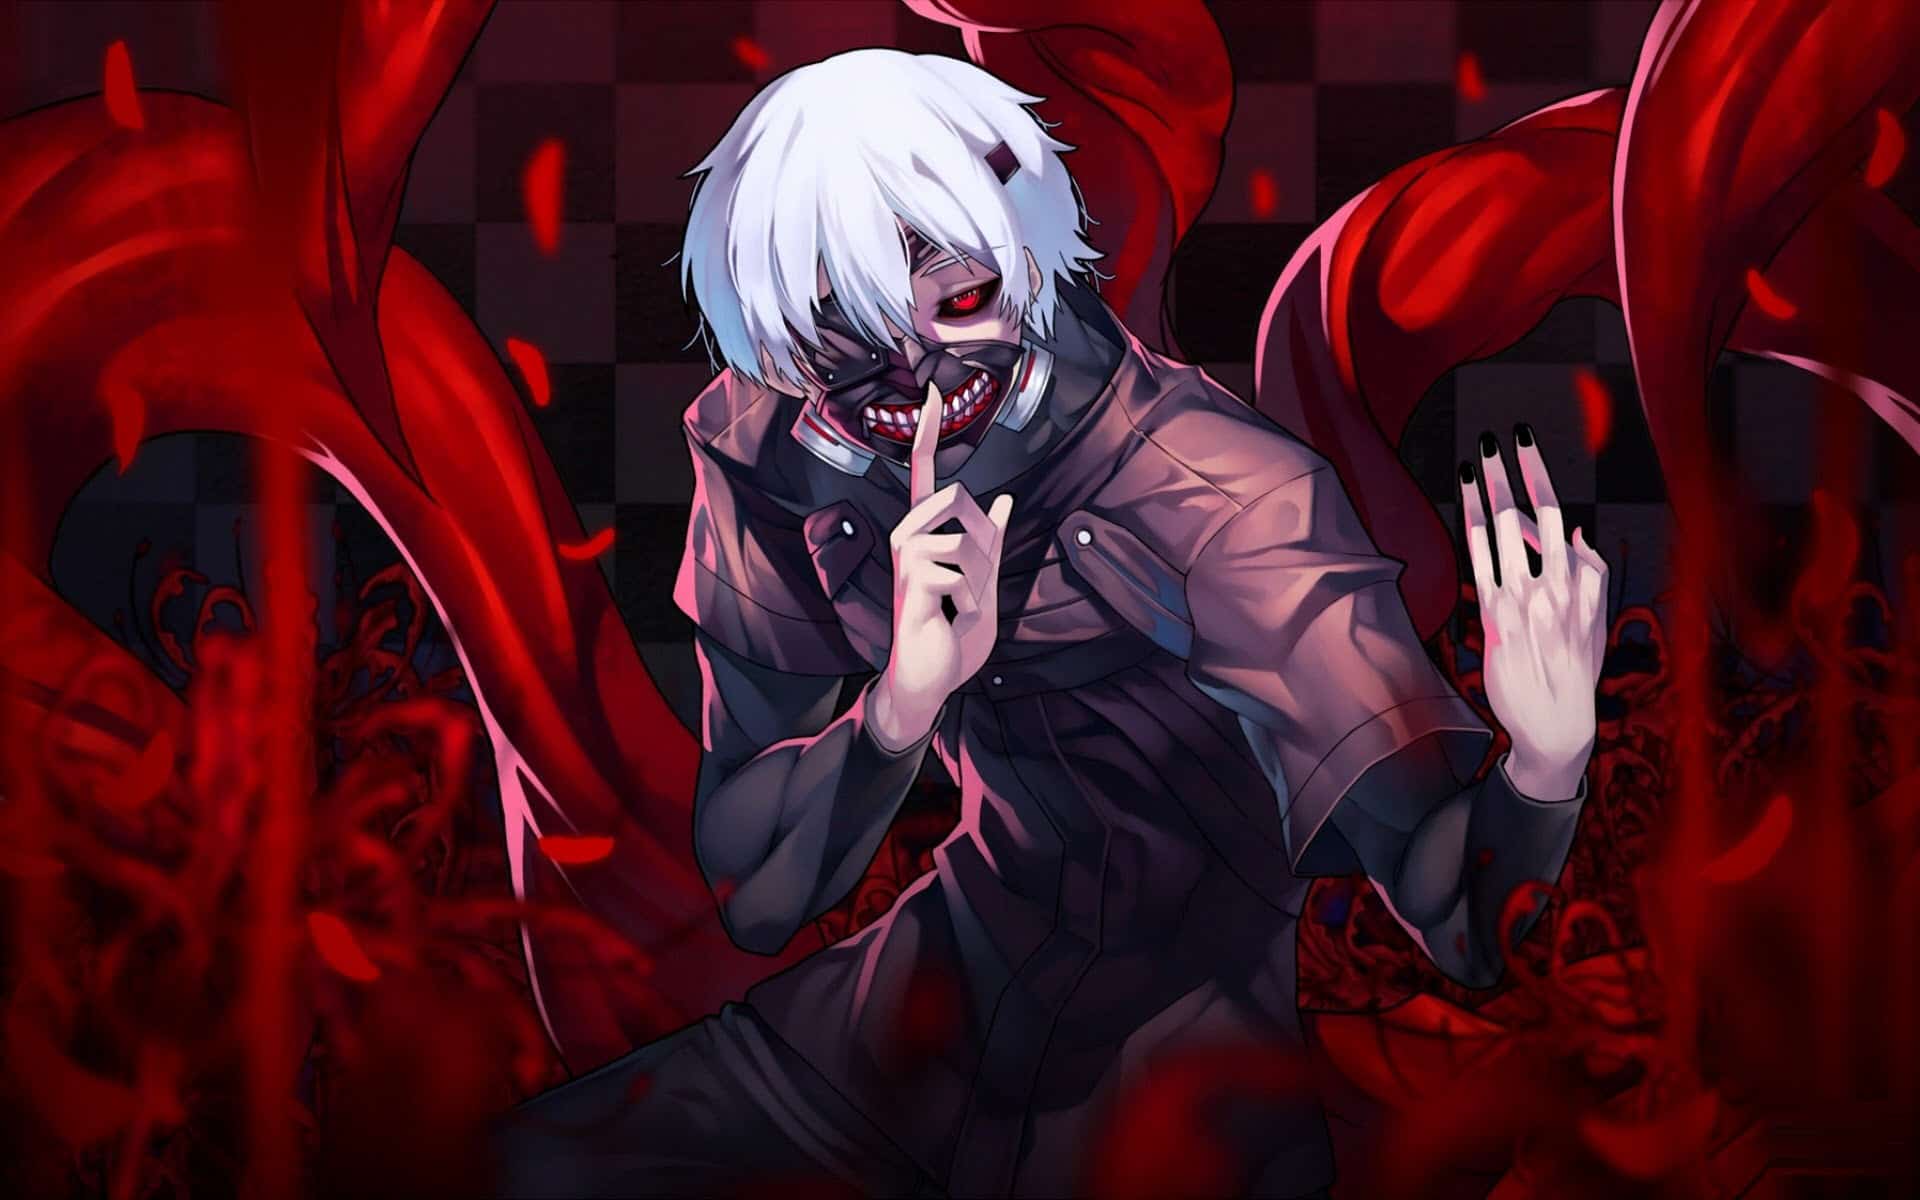 1000 Anime Tokyo Ghoul HD Wallpapers and Backgrounds